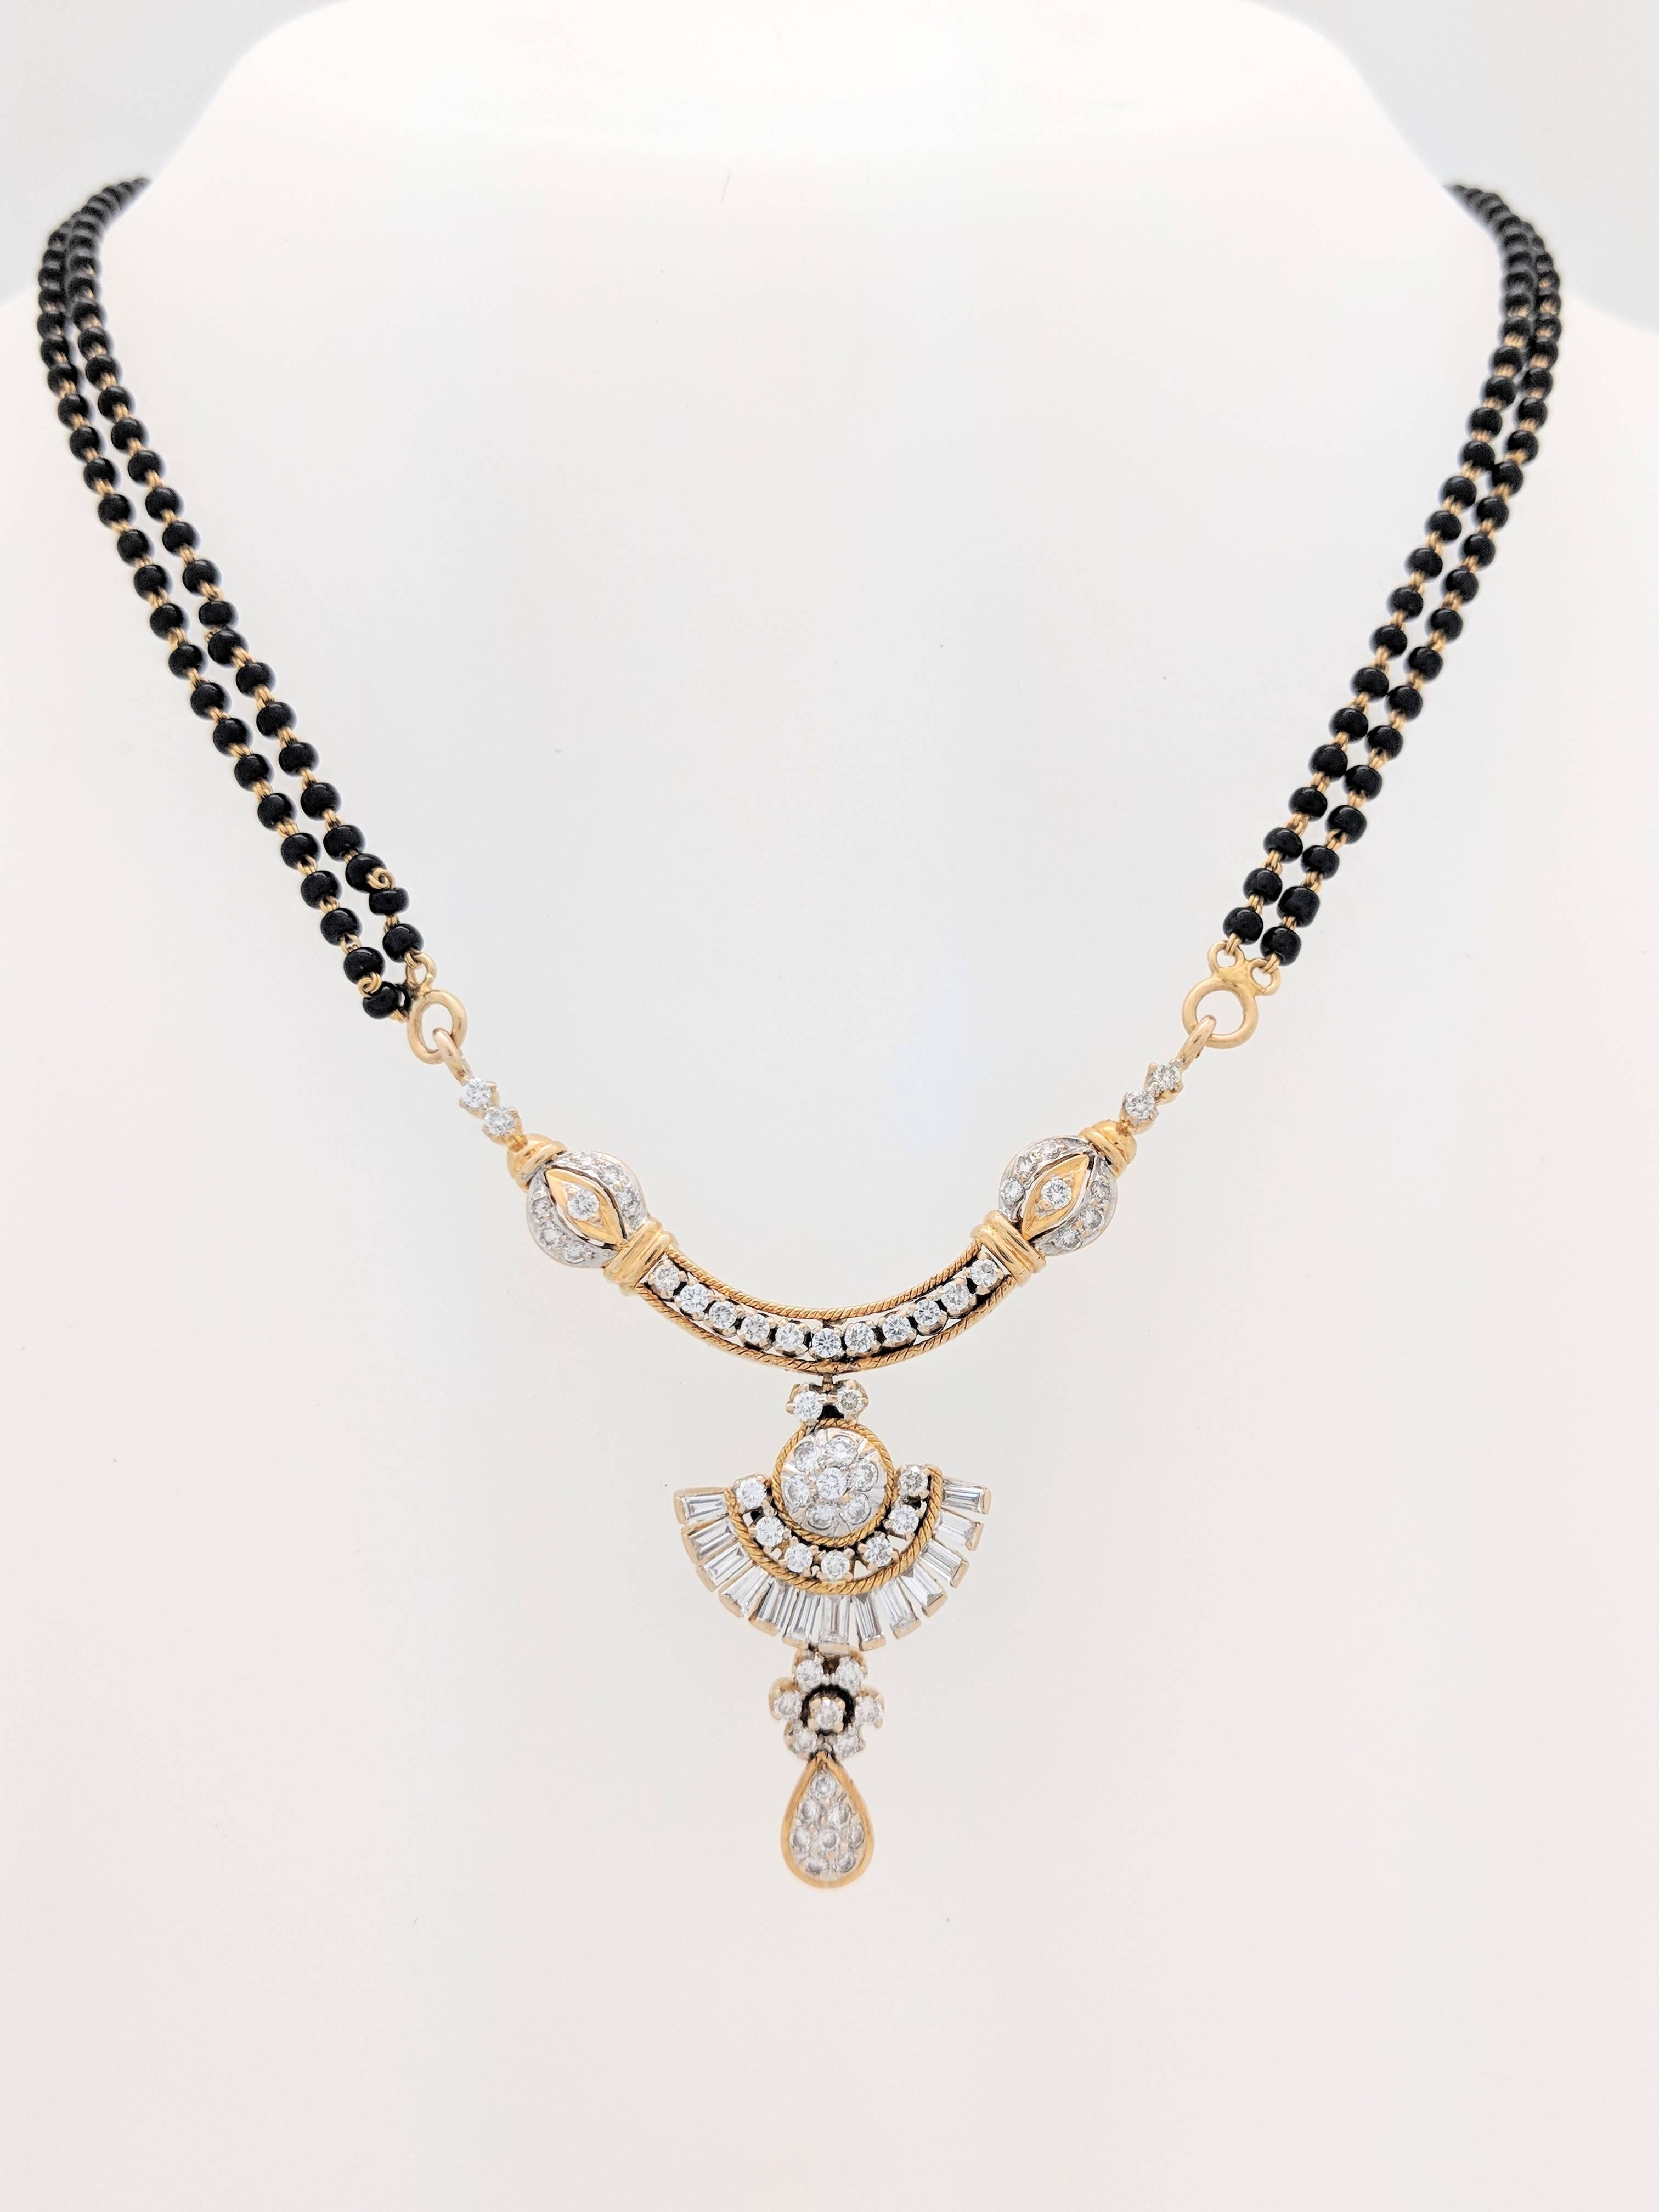 22K Yellow Gold Handmade Mangalsutra Necklace Indian Bridal Jewelry w/Diamonds

You are viewing a Beautiful Handmade Mangalsutra Necklace/Pendant. This is truly a stunning piece that any woman would love to add to their collection. This necklace is